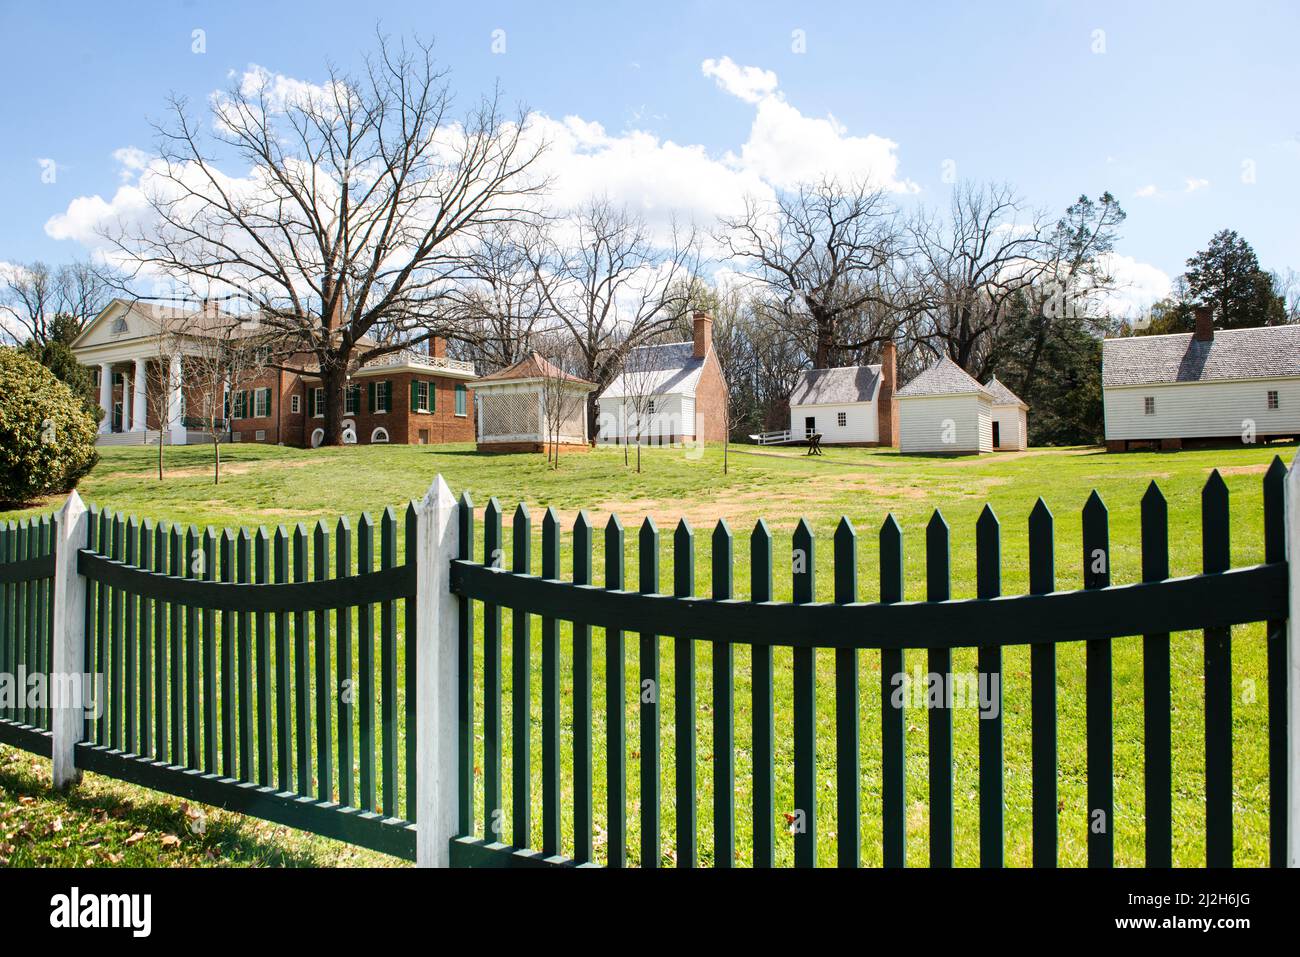 Montpelier Home of President James Madison & Dolley Madison. Enslaved homes. Reconstructed slavery quarters, South Yard. Picket fence. Caption space. Stock Photo